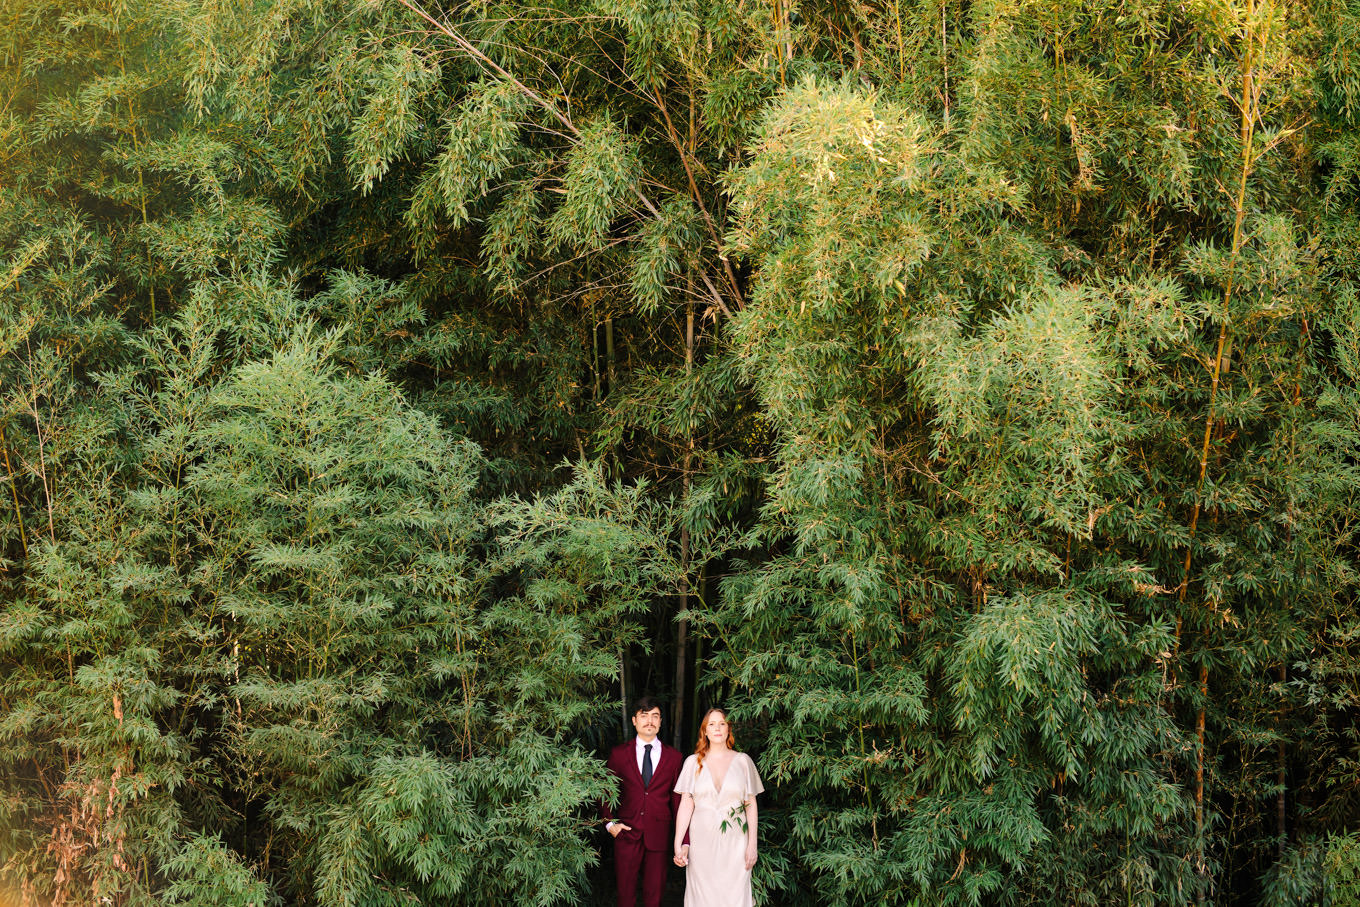 Los Angeles Arboretum elopement among bamboo trees | Engagement, elopement, and wedding photography roundup of Mary Costa’s favorite images from 2020 | Colorful and elevated photography for fun-loving couples in Southern California | #2020wedding #elopement #weddingphoto #weddingphotography #microwedding   Source: Mary Costa Photography | Los Angeles